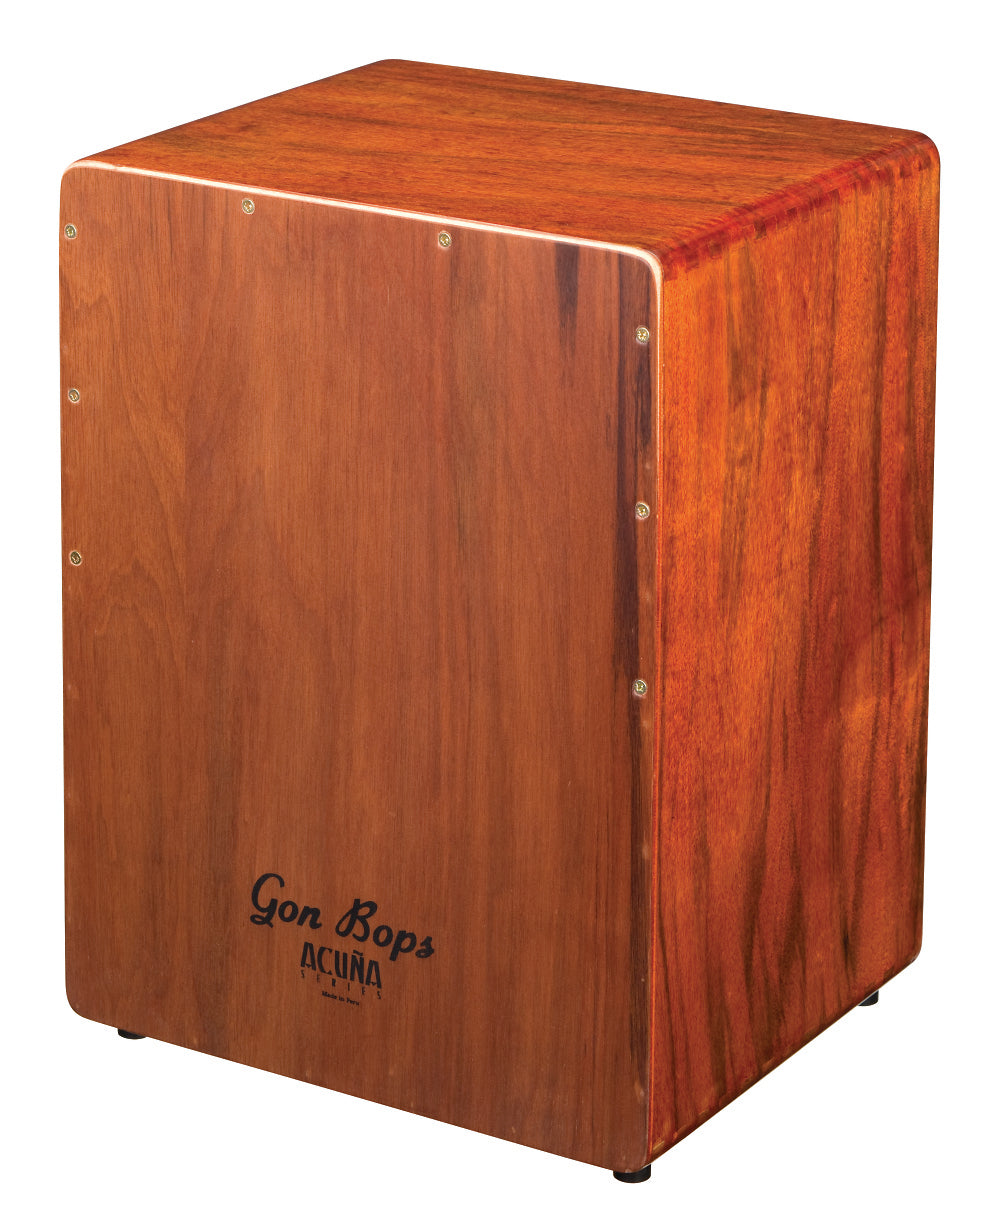 Gon Bops Alex Acuna Signature Cajon Mohena Wood Natural Lacquer FREE Shipping | Authorized Dealer